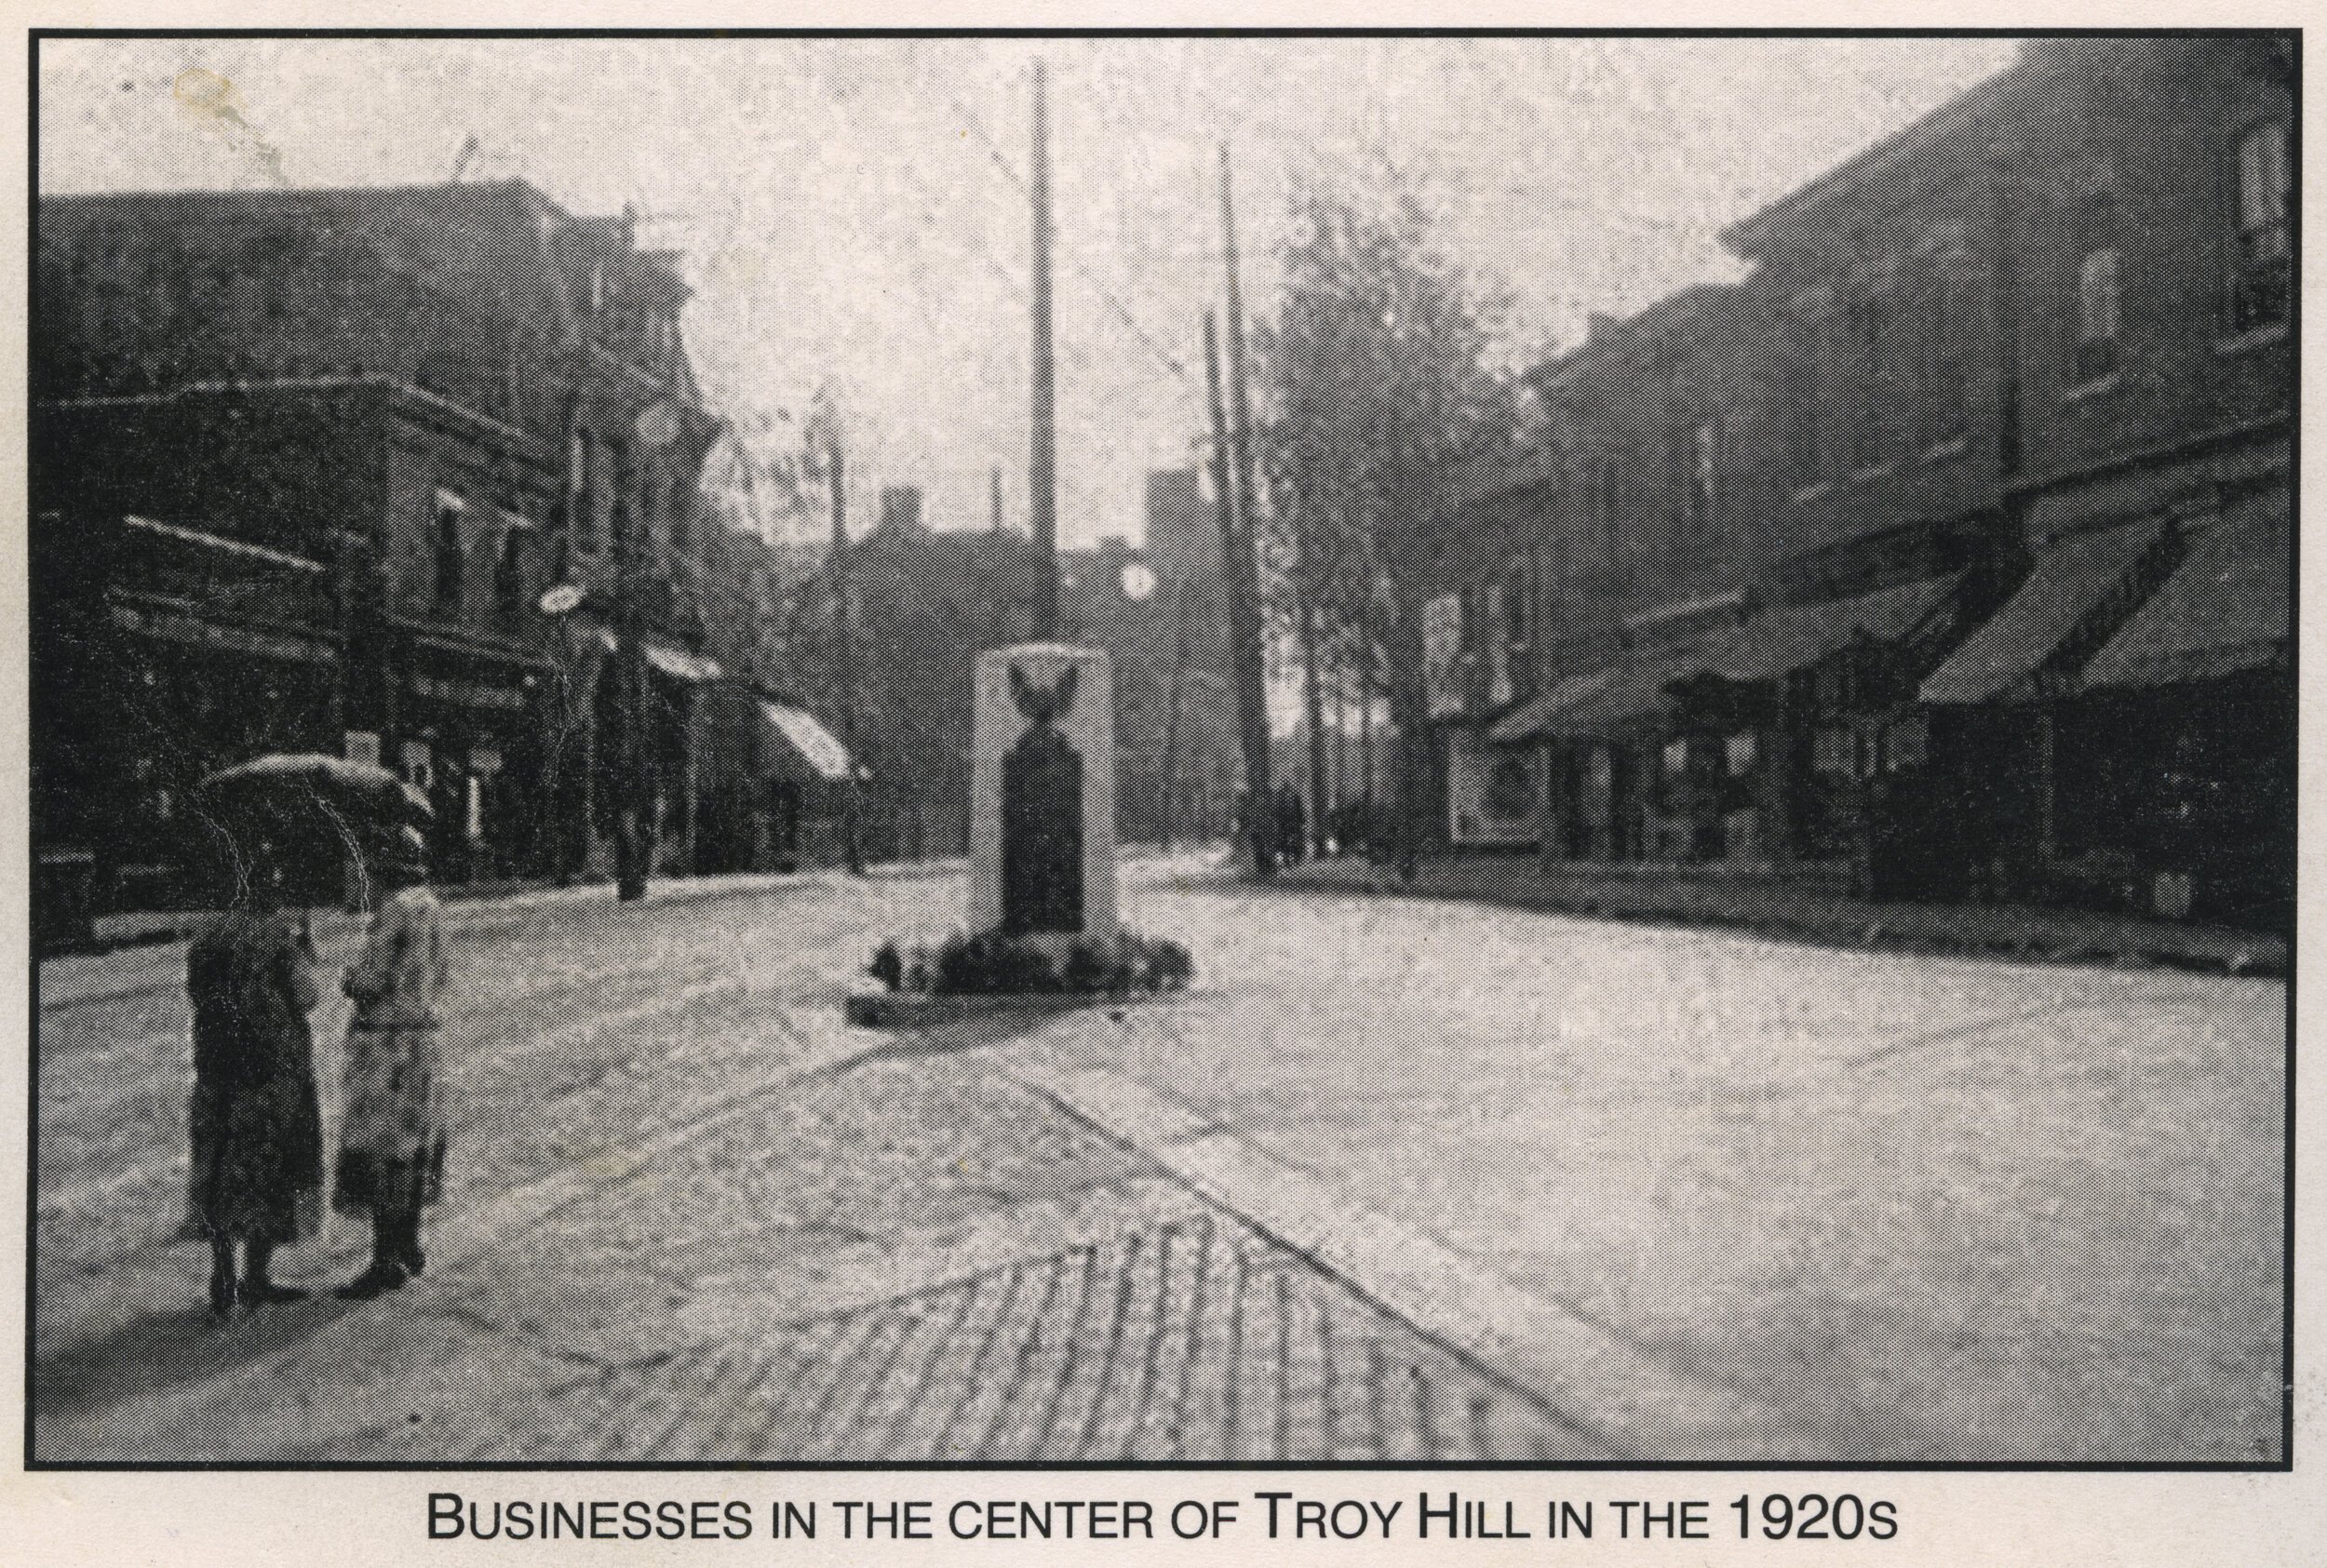 Businesses_in_the_center_of_troy_hill.jpg